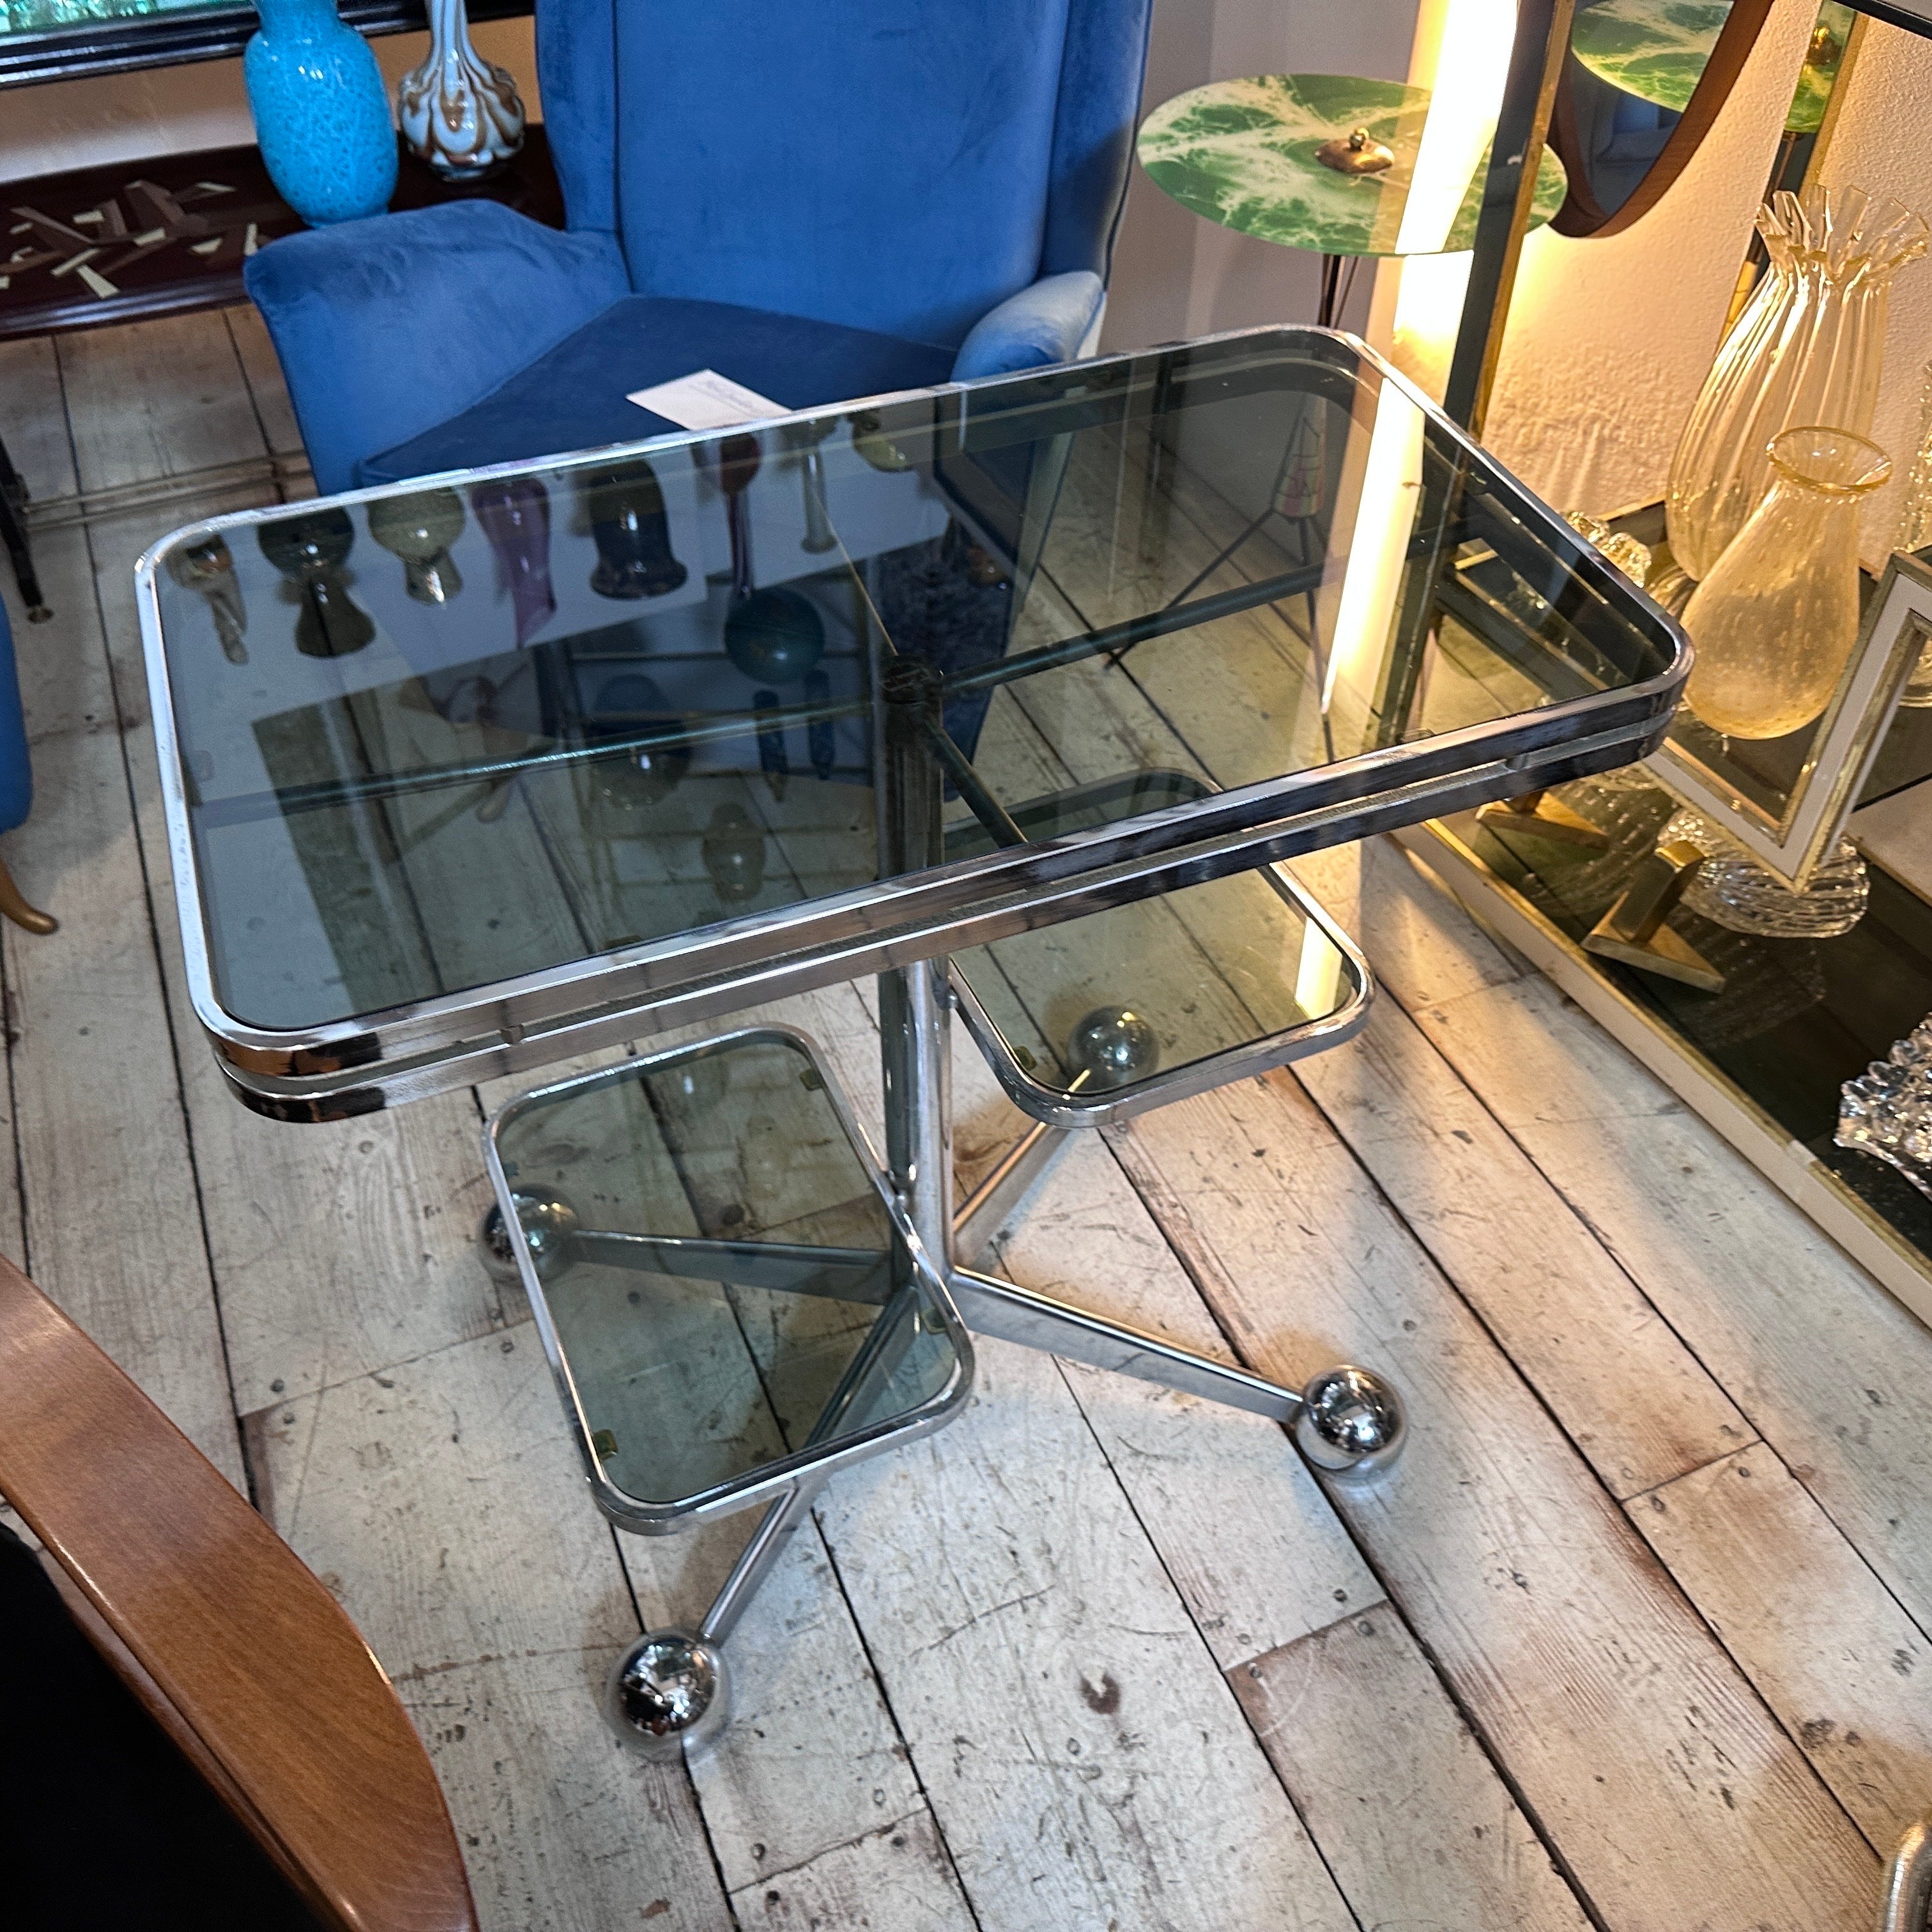 A muti-level bar cart designed and manufactured in the Space Age era by Allegri Arredamenti, the chromed metal and the dark glasses are in good conditions, it's labeled on the central foot. The 1970s Space Age design movement was characterized by